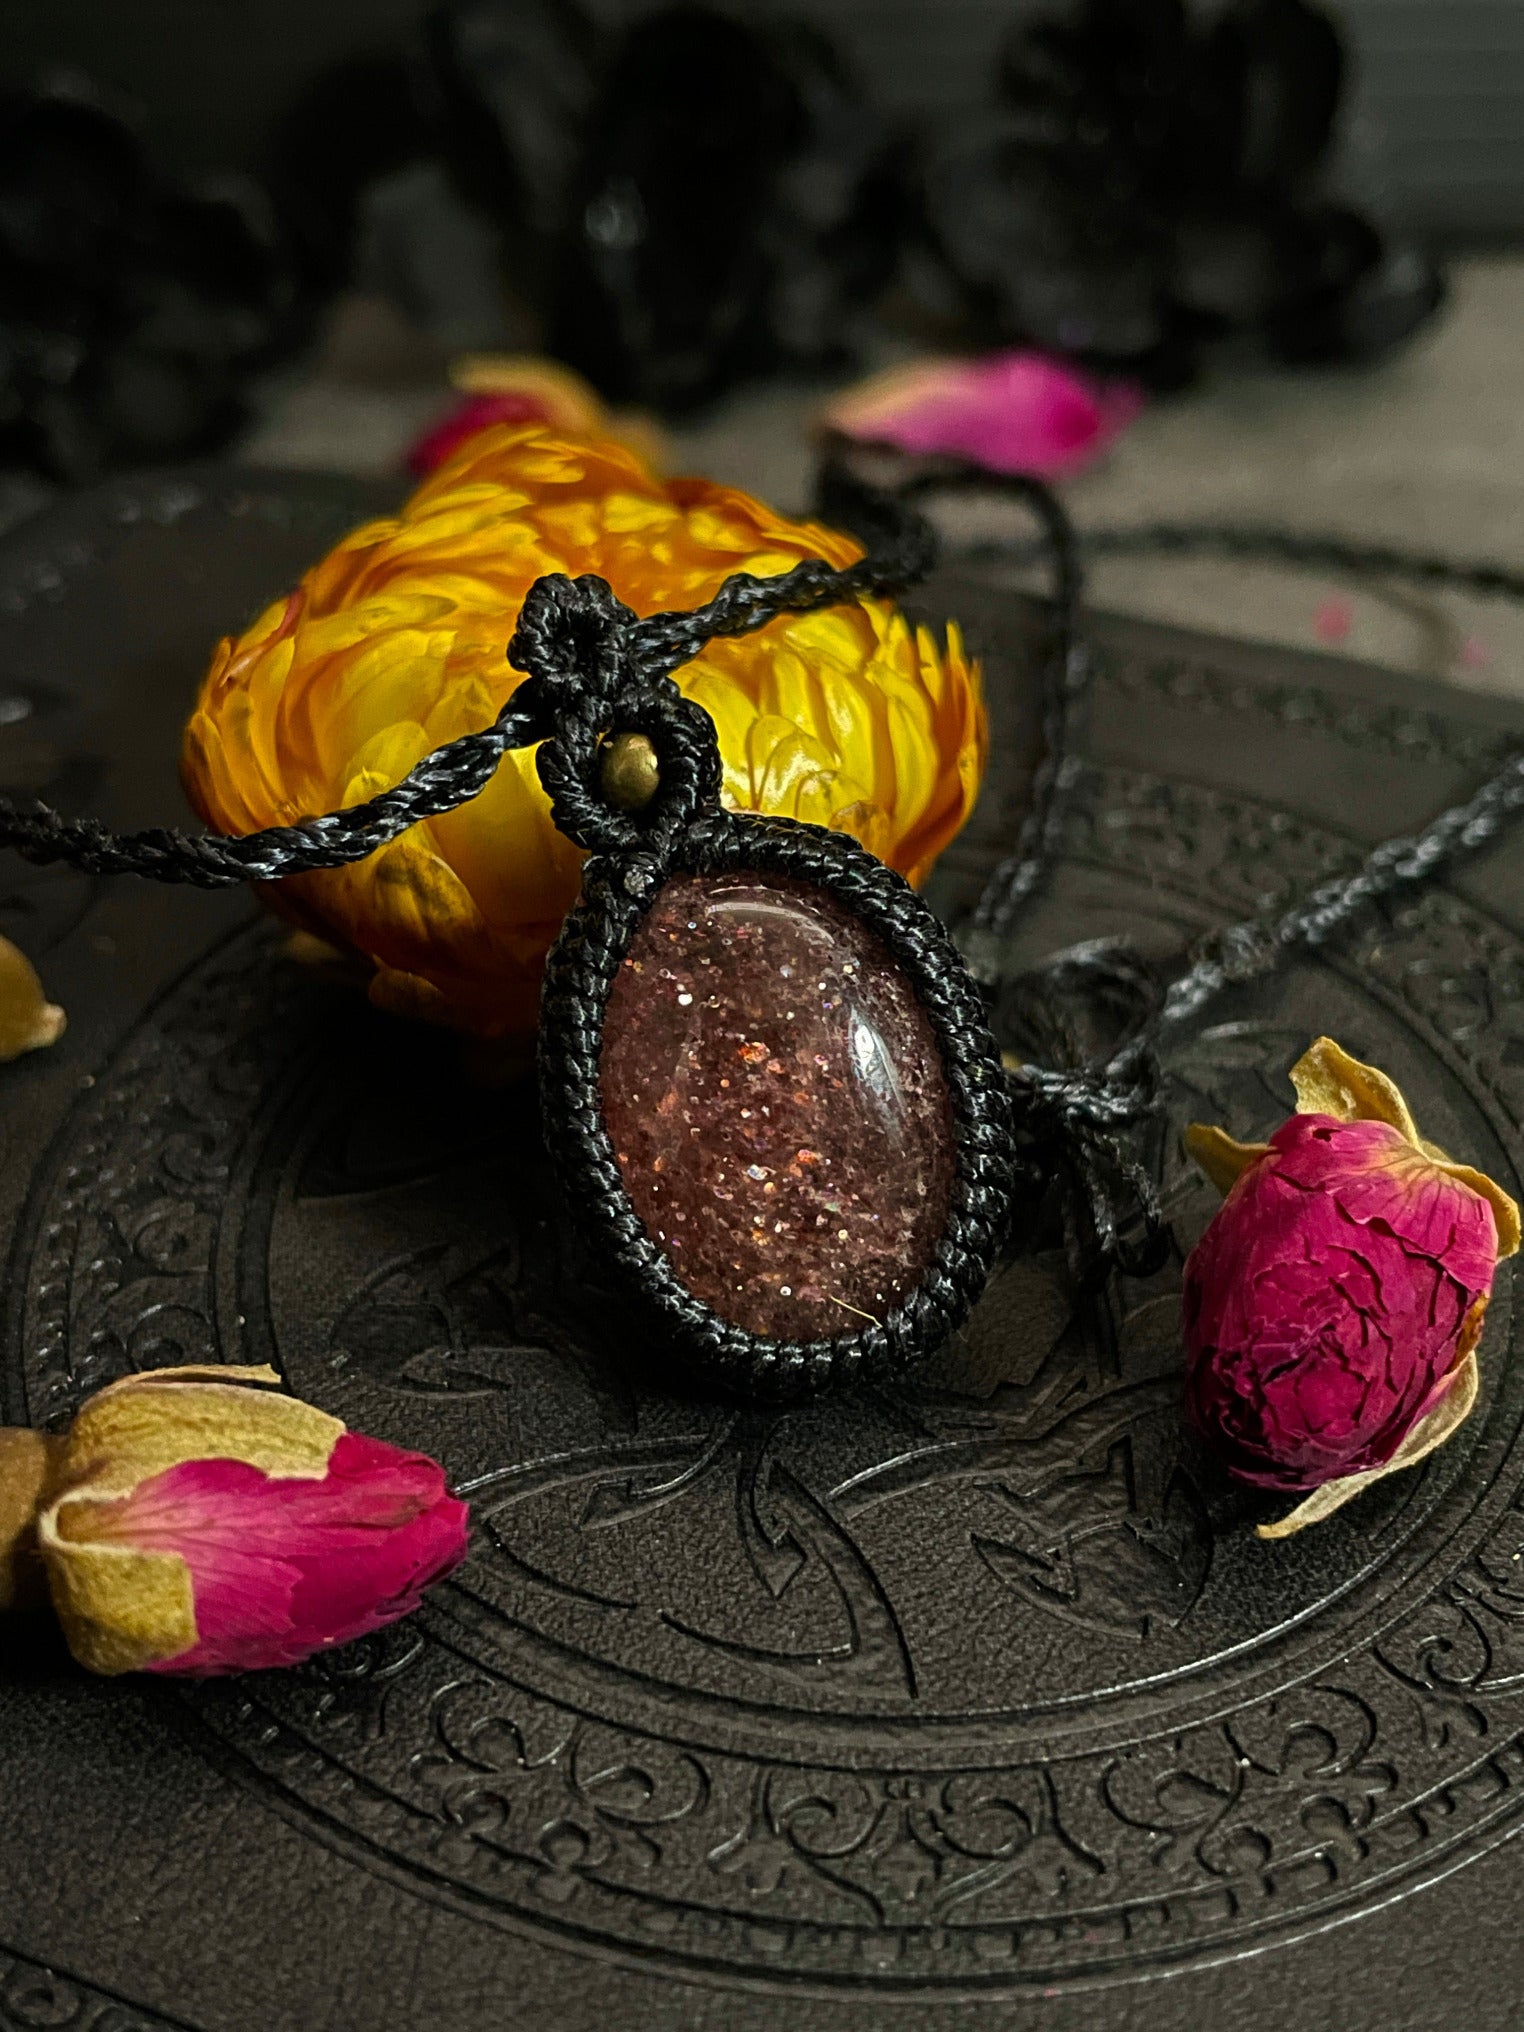 Pictured is a strawberry quartz cabochon wrapped in macrame thread. A gothic book and flowers are nearby.